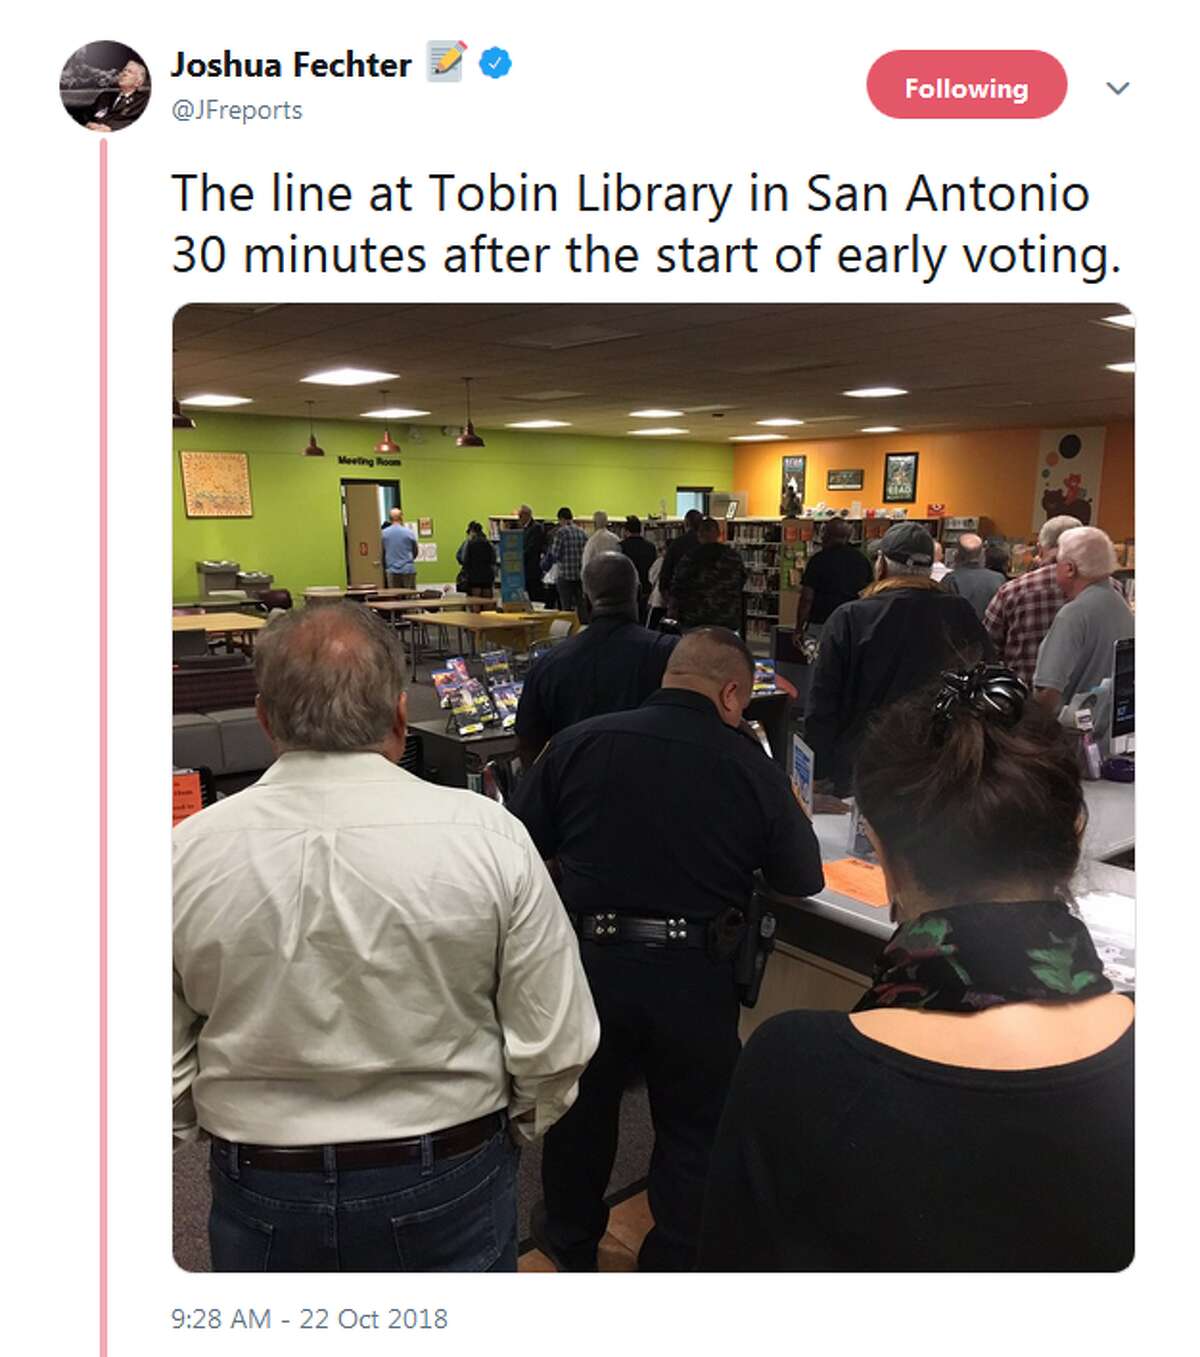 @JFreports: The line at Tobin Library in San Antonio 30 minutes after the start of early voting.